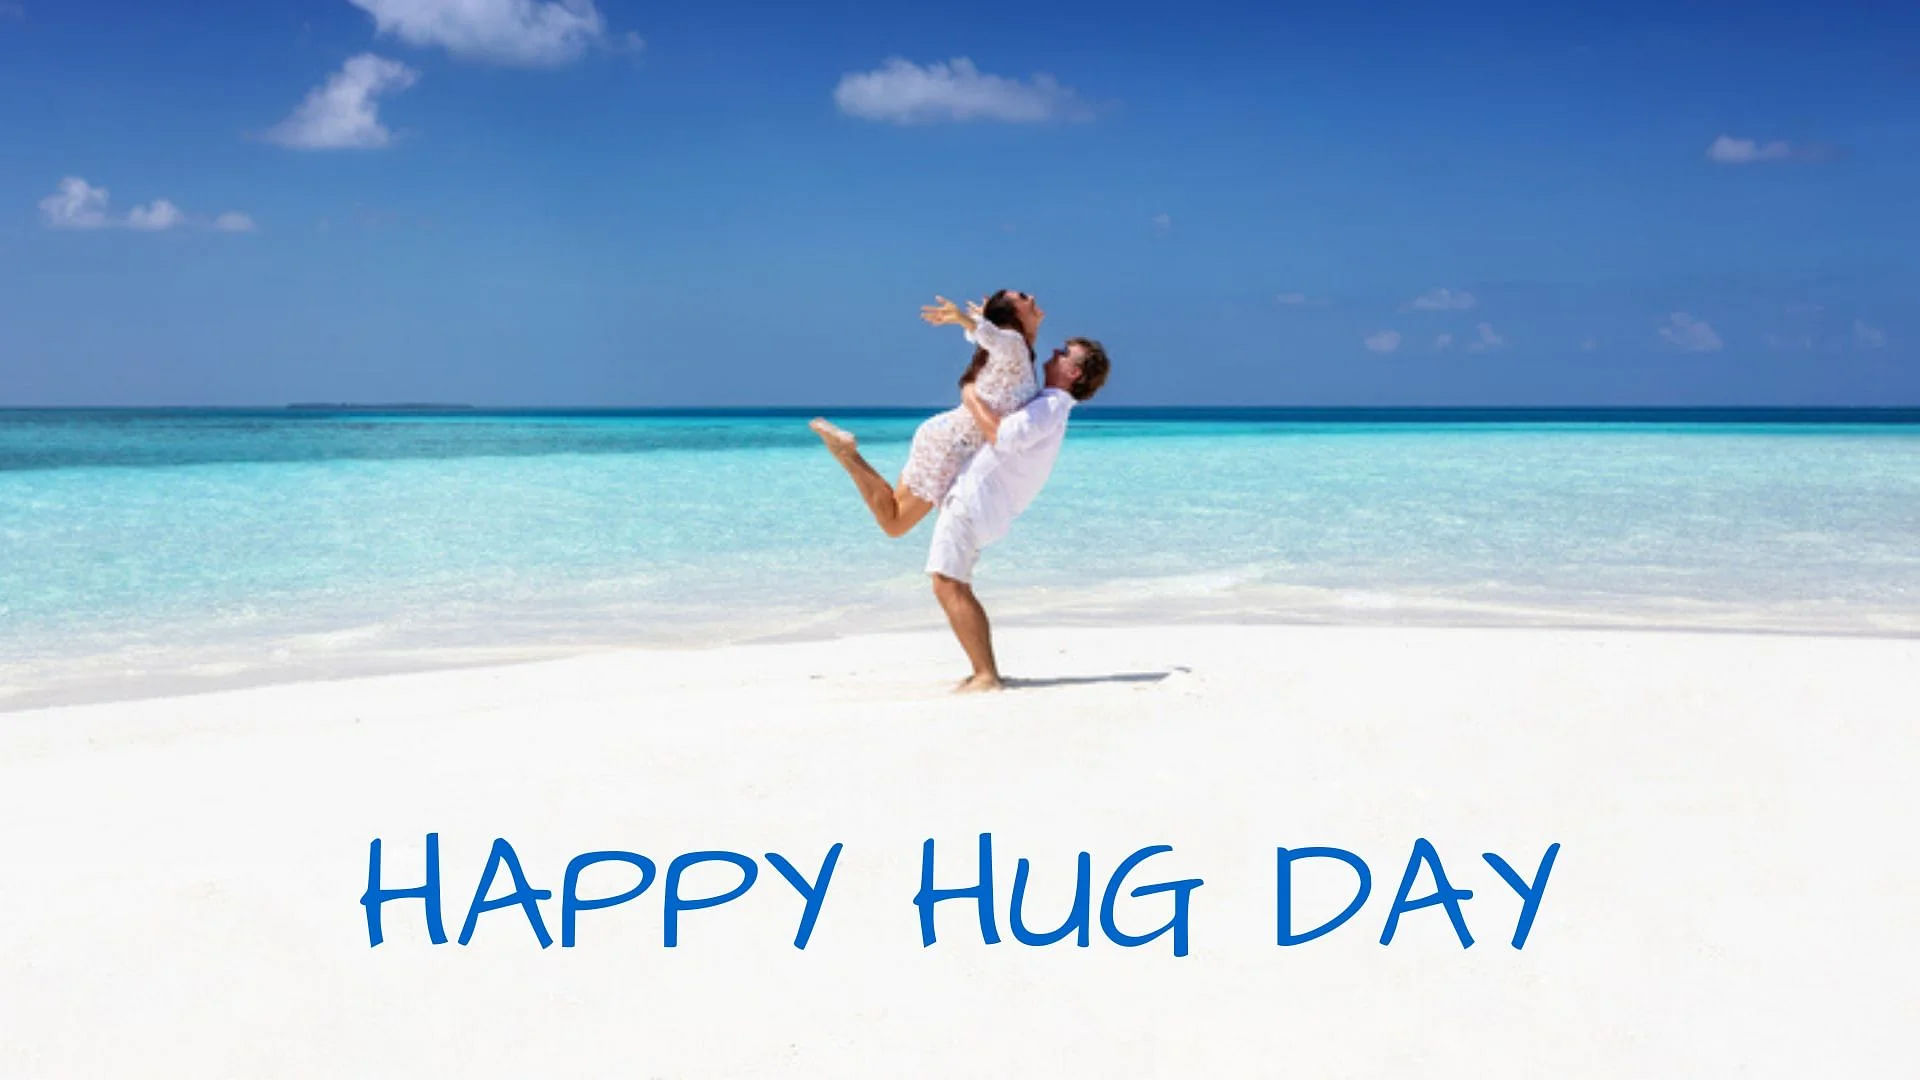 Happy Hug Day 2020 Images with Quotes, Wishes, and Greeting Cards for loved ones